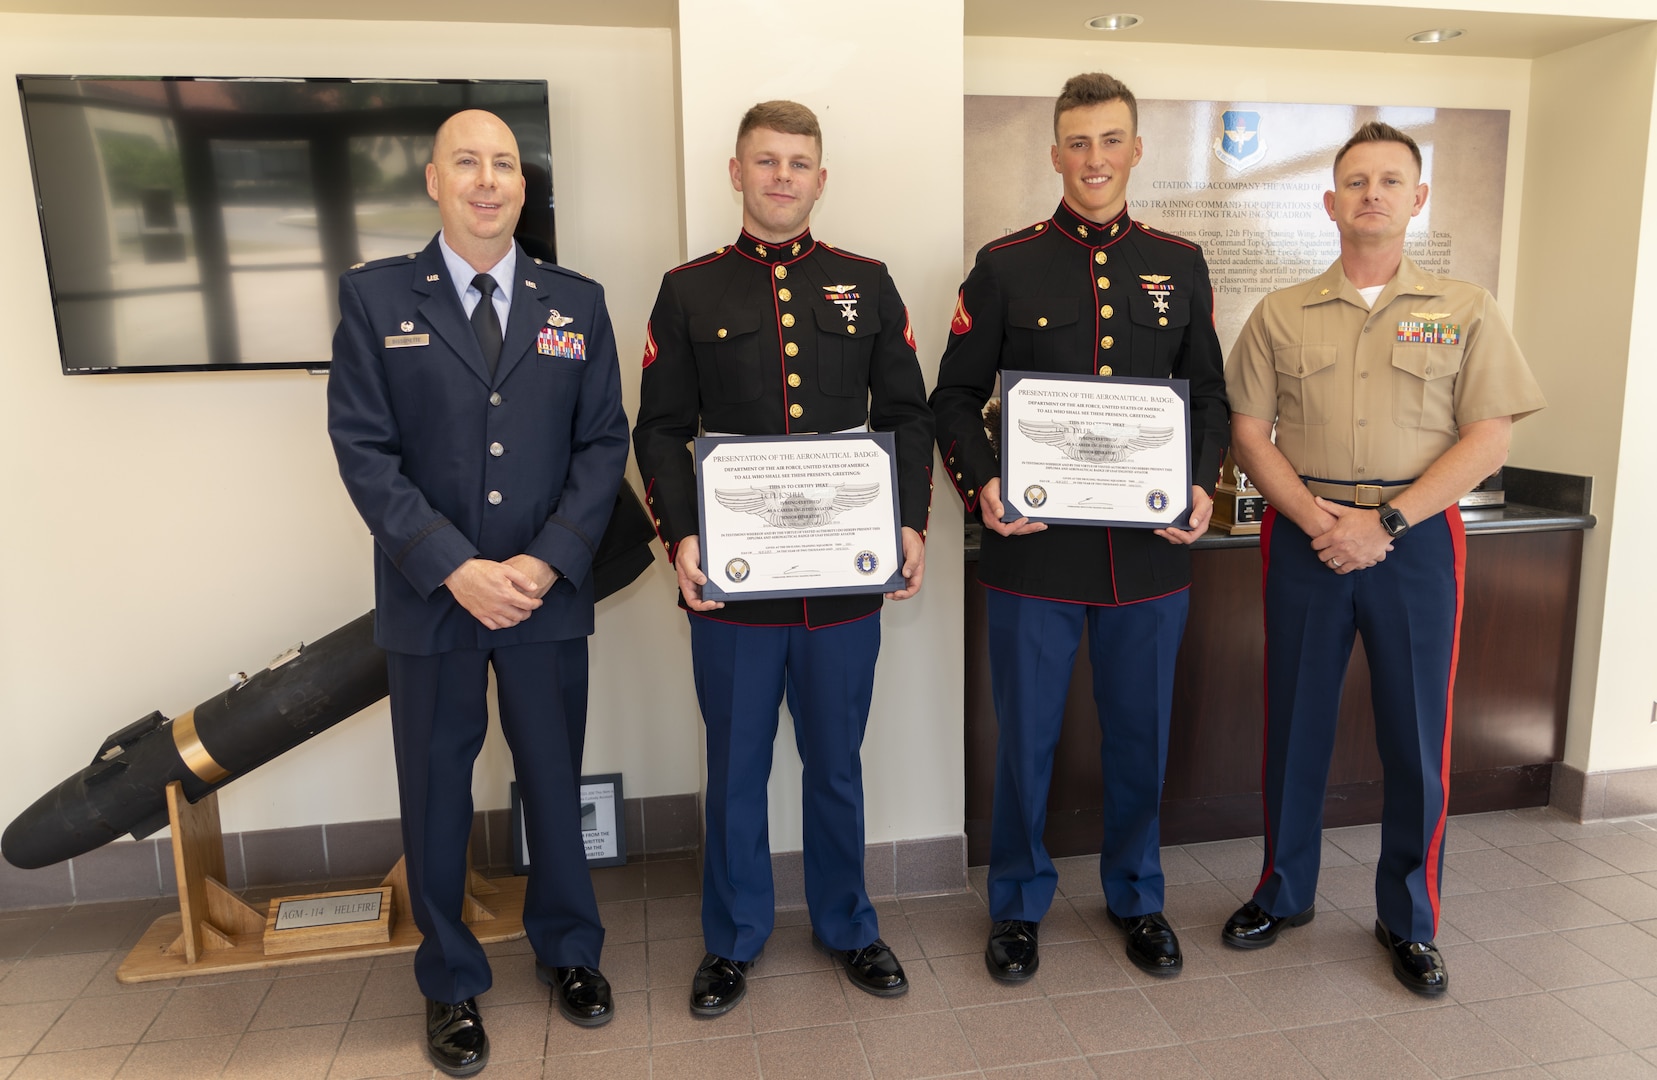 The Commander of 558 Flying Training Squadron (FTS) Lt. Col. Eric Bissonette (left) and Marine Liaison to 558 FTS Major Matthew Bailey (right) stand with two graduates from the 19-14 Basic Sensor Operator Course (BSOC) graduating class after a winging ceremony. LCpl Joshua (center left) and LCpl Tyler (center right) are the first two Marines to complete 558 FTS BSOC and go on to qualify on the MQ-9 Reaper Unmanned Aircraft System (UAS). The BSOC training program is a Air Force school which Marines have recently been doing a joint training with part of the 558 flight training squadron aboard Randolph Air Force Base